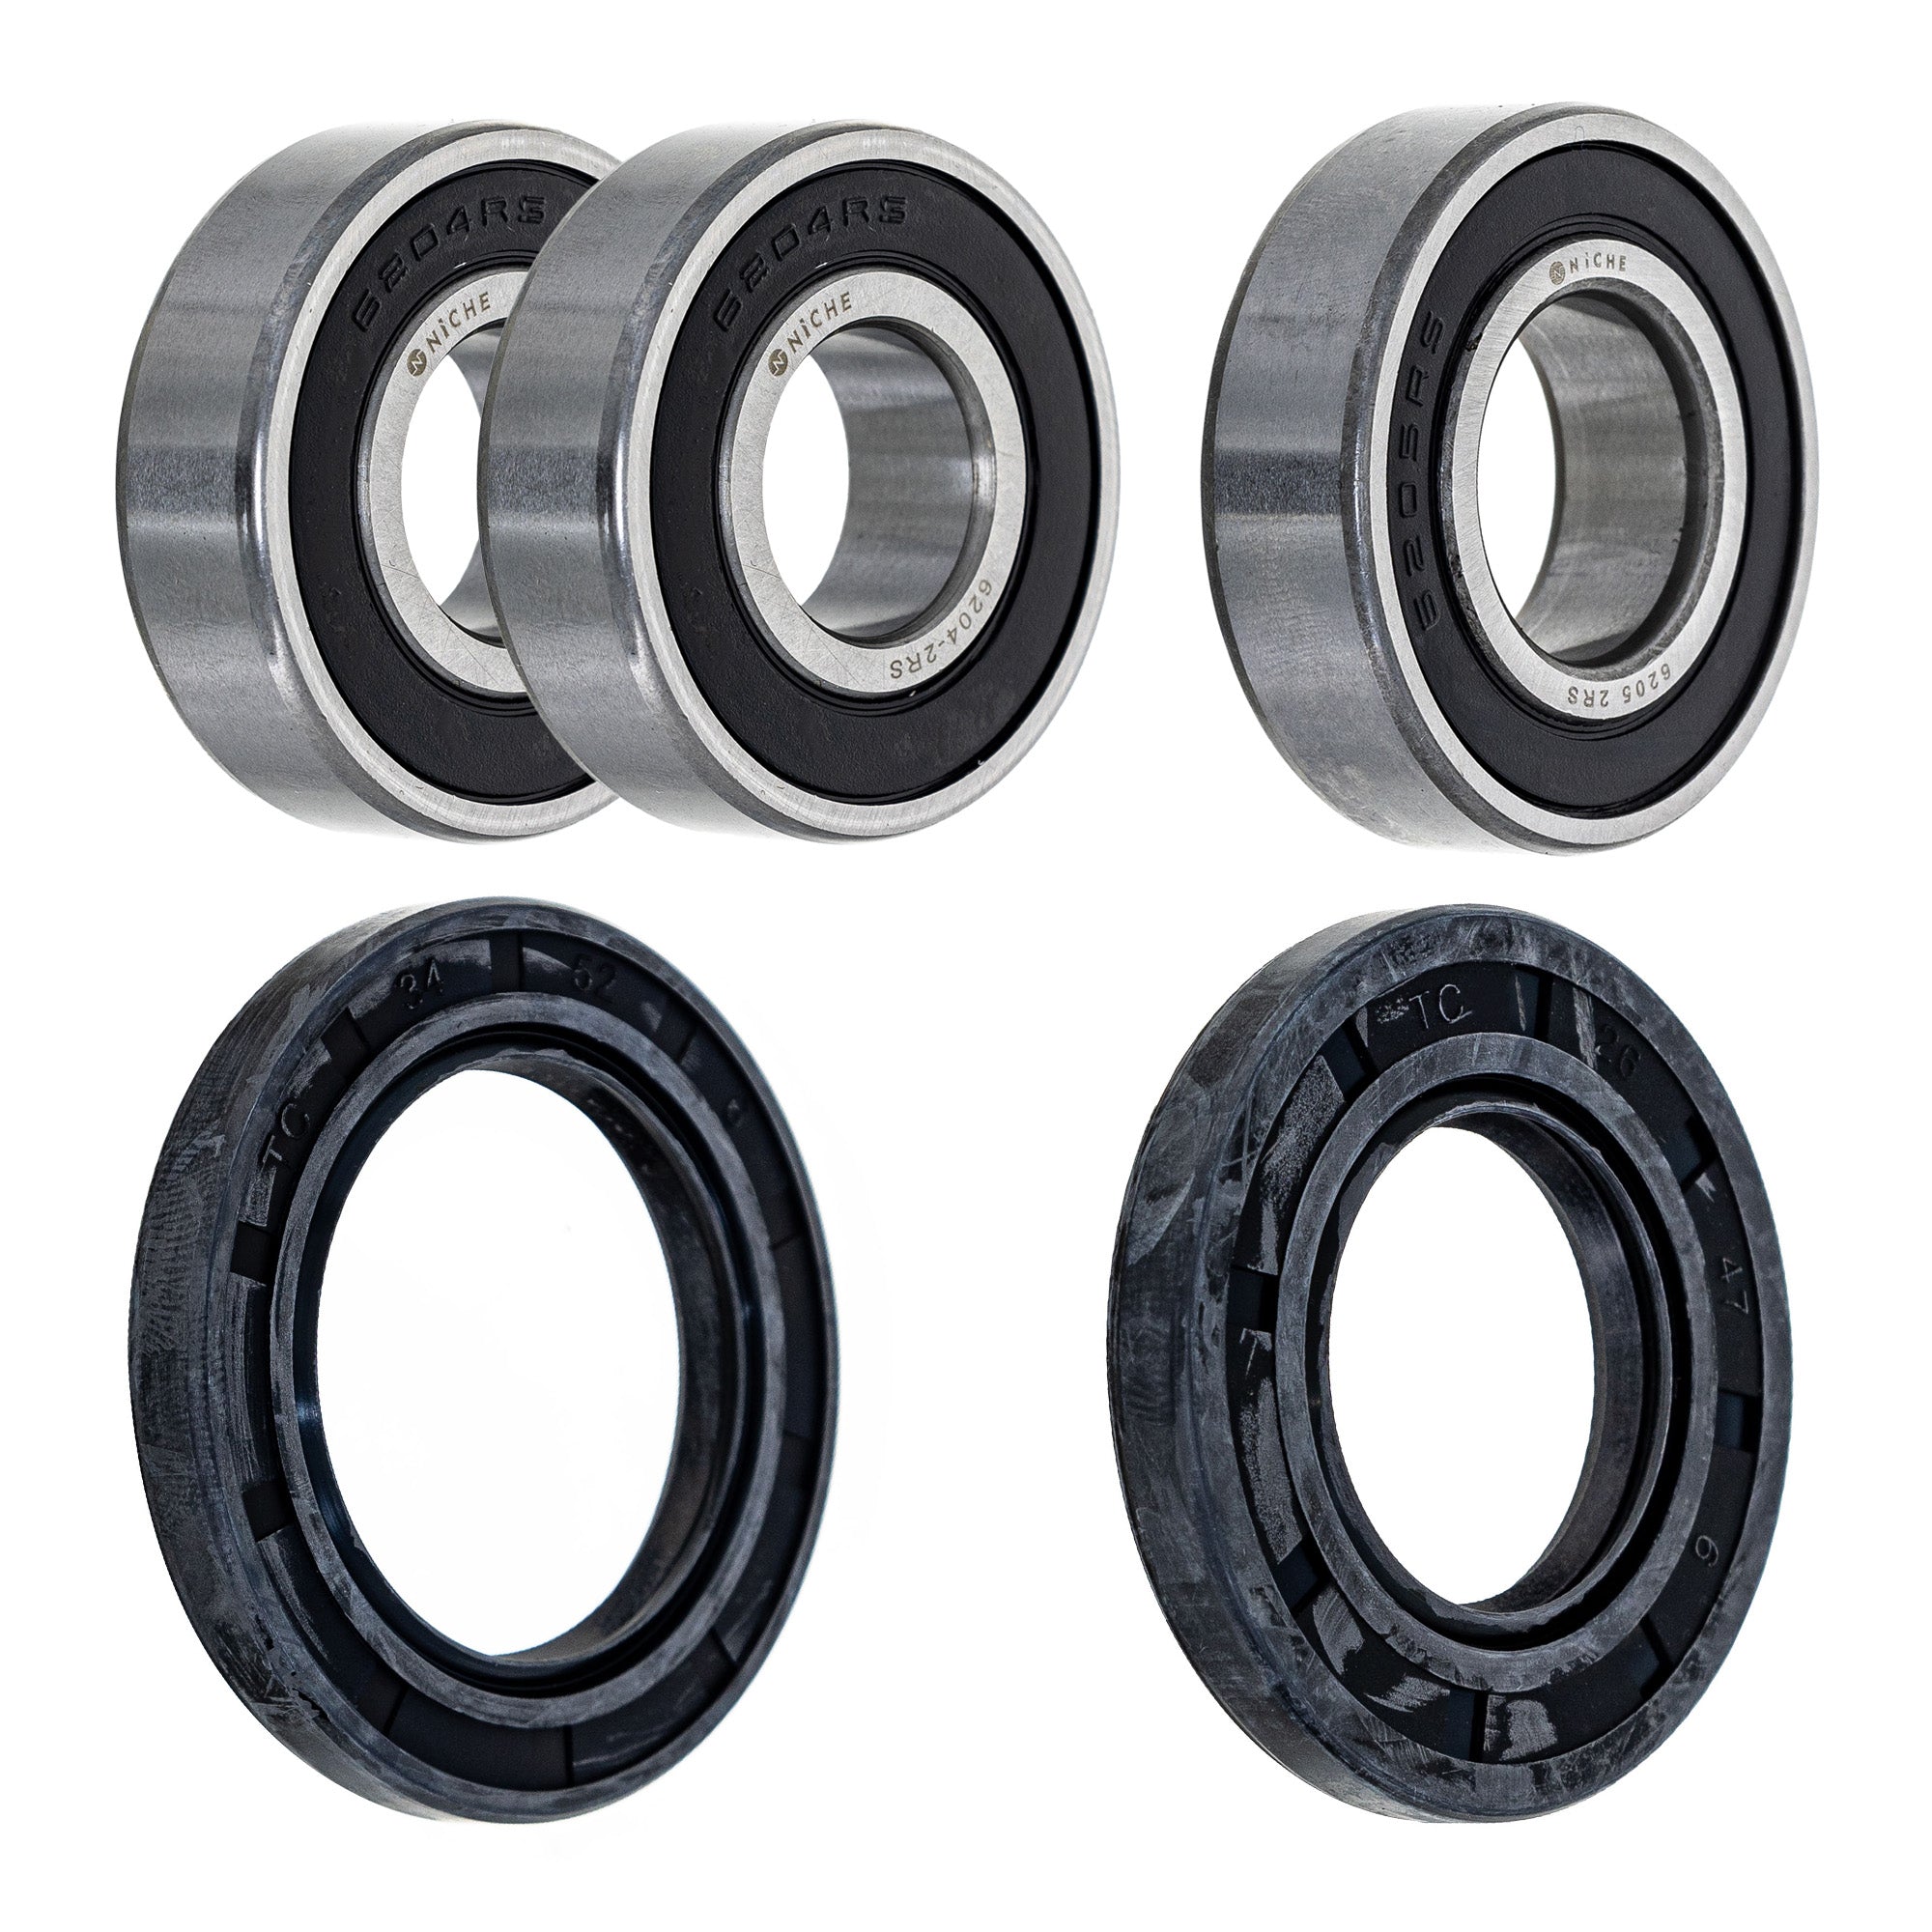 Wheel Bearing Seal Kit for zOTHER Ref No DR650SE NICHE MK1008876